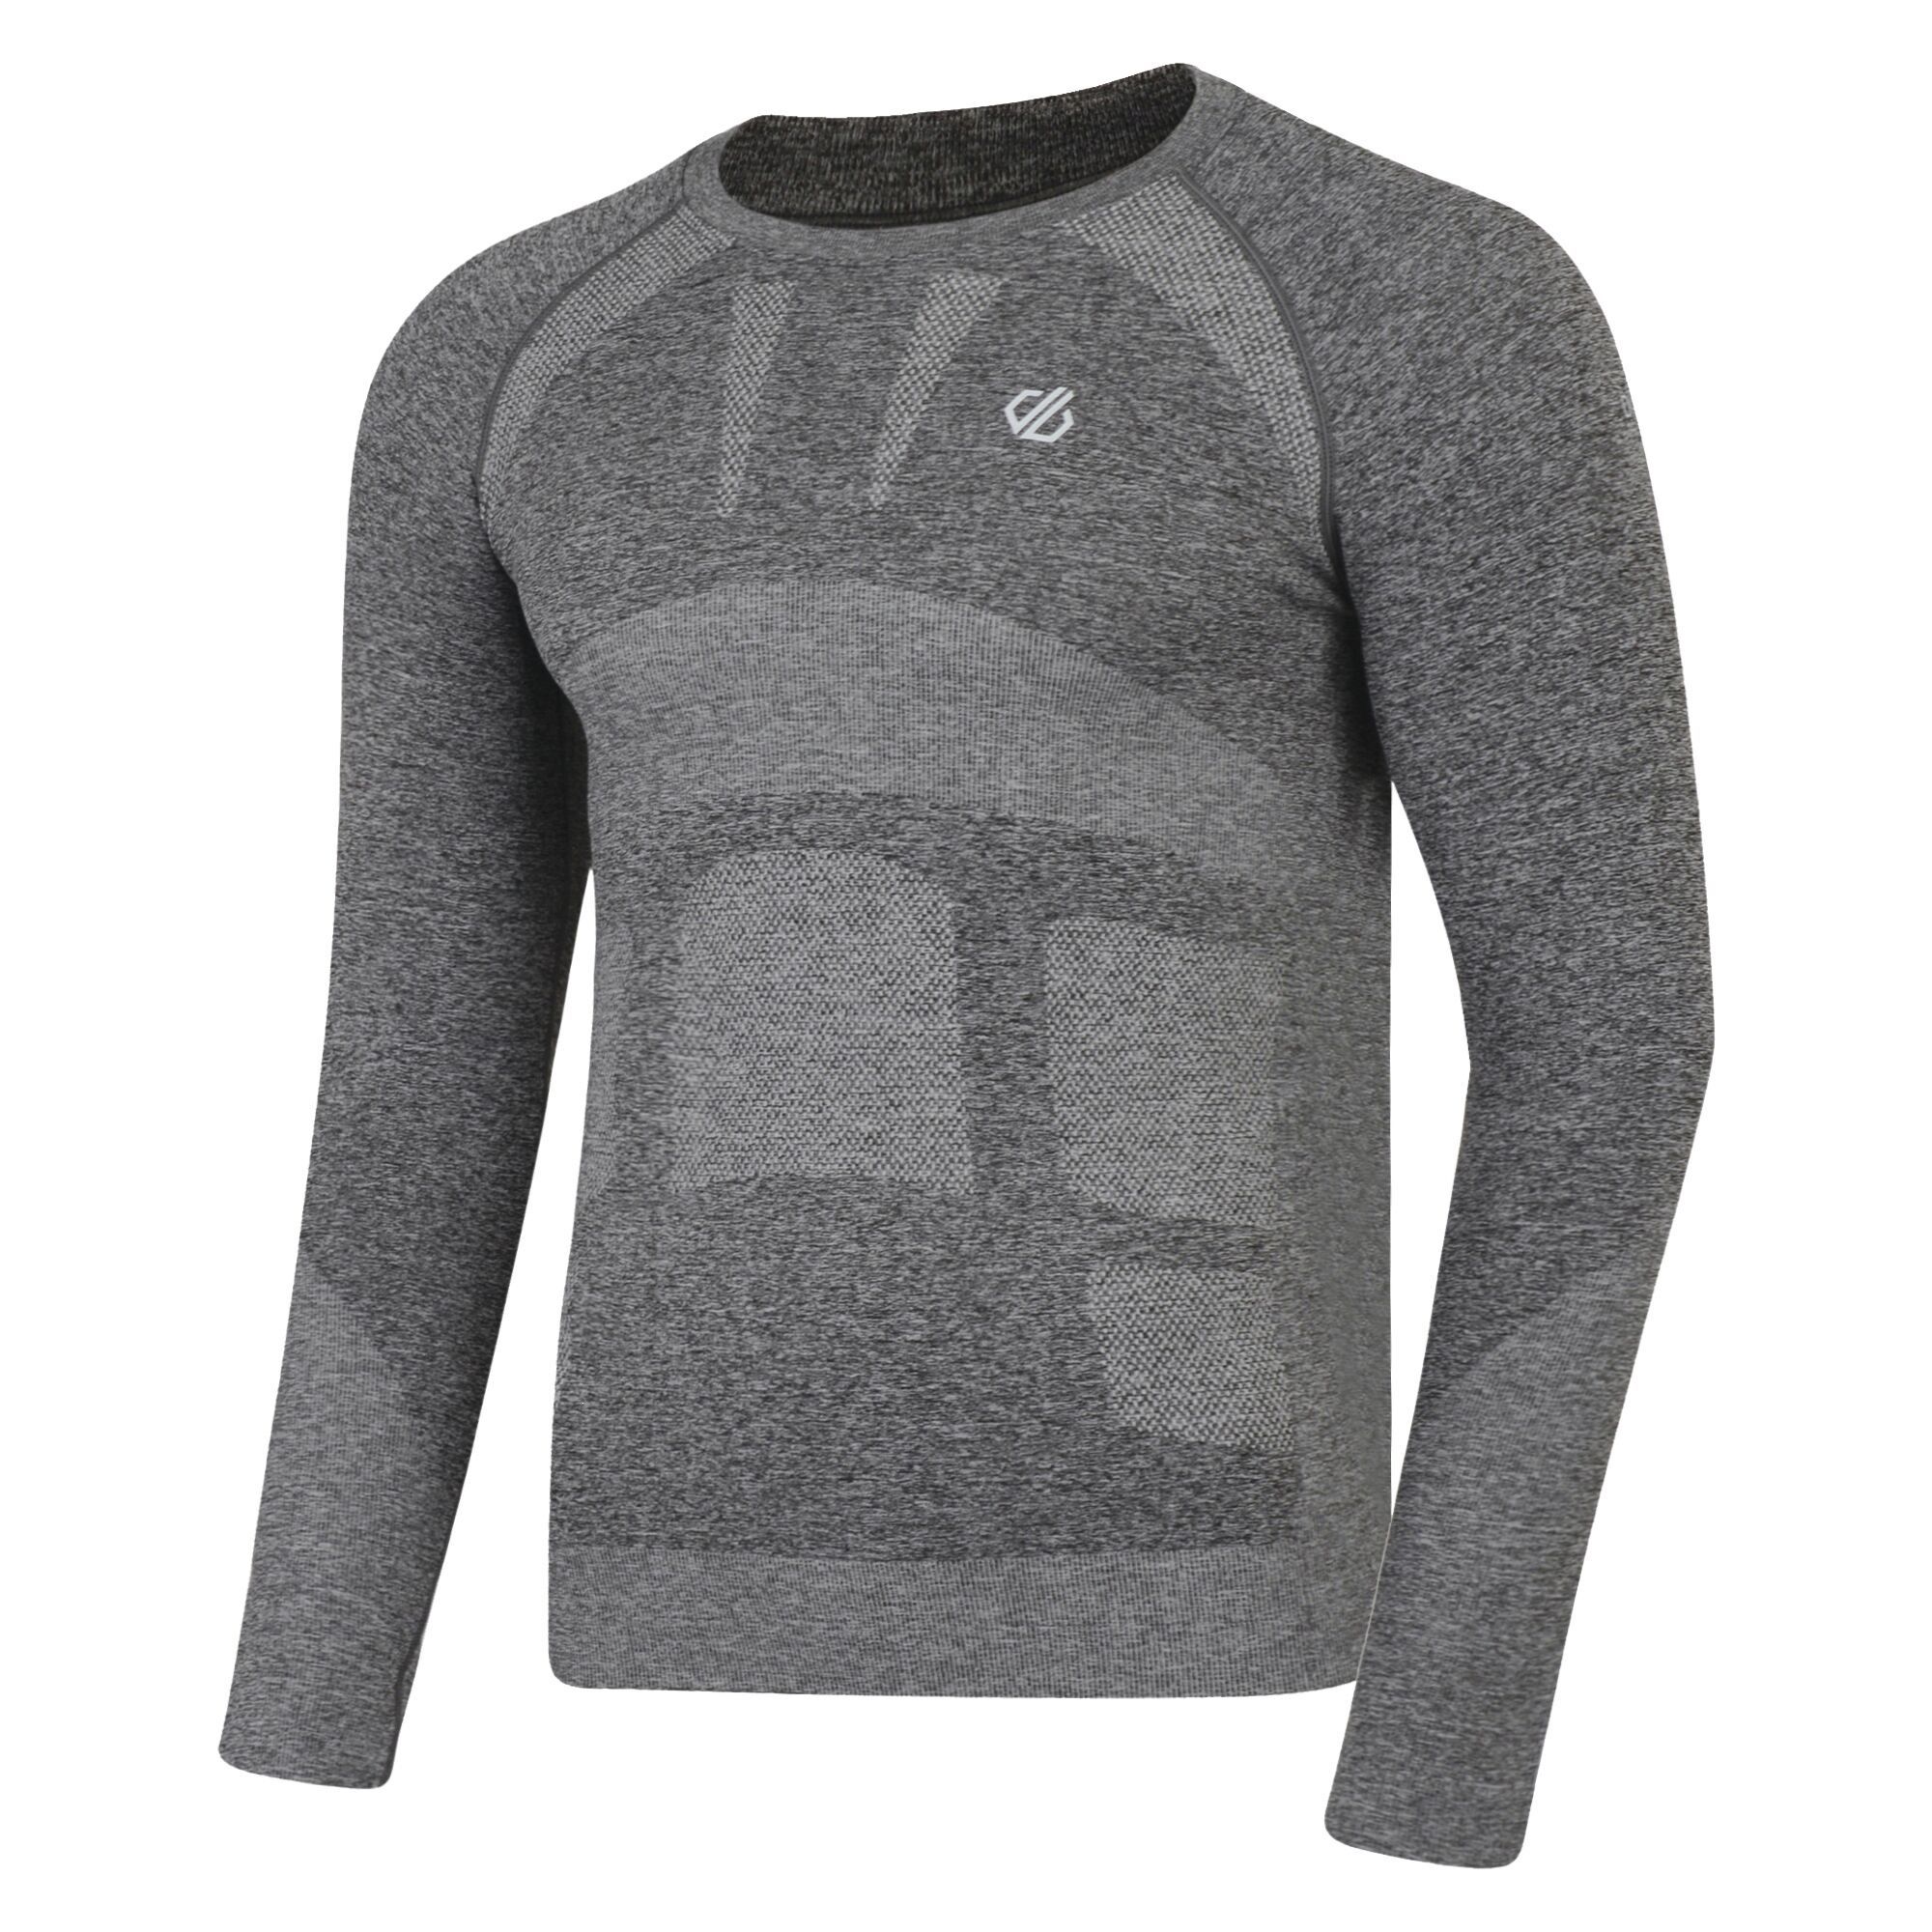 Performance base layer collection. SeamSmart Technology. Q-Wic Seamless polyester/elastane knitted fabric. Ergonomic body map fit. Fast wicking and quick drying properties.  odour control treatment. Dare 2B Mens Sizing (chest approx): XXS (34in/86cm), XS (36in/92cm), S (38in/97cm), M (40in/102cm), L (42in/107cm), XL (44in/112cm), XXL (47in/119cm), XXXL (50in/127cm), XXXXL (53in/134cm), XXXXXL (56in/142cm).